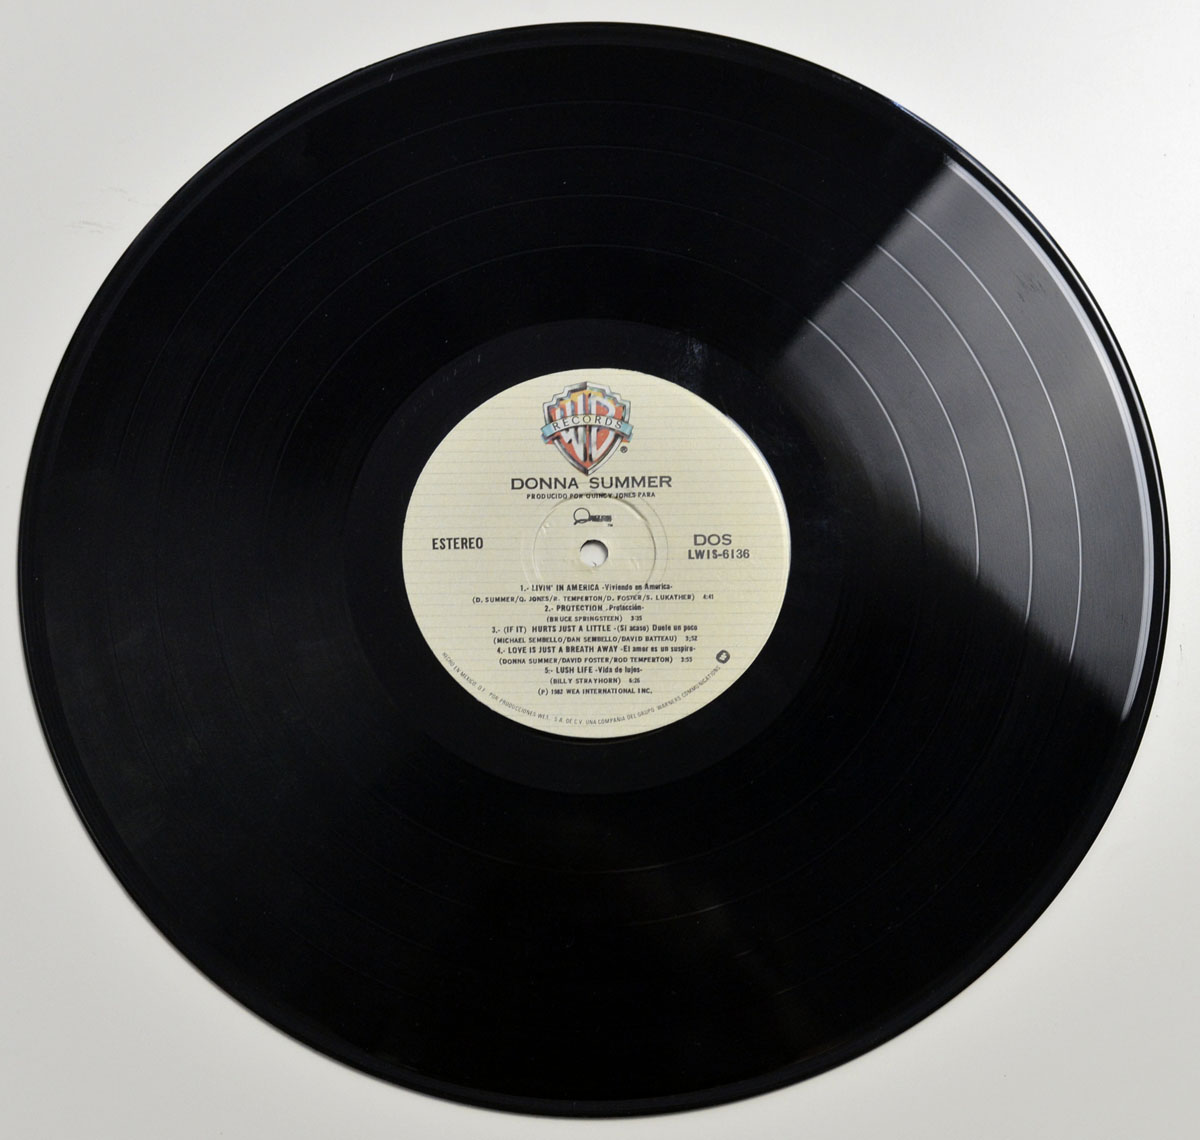 High Resolution Photo   of Side B  Sexy Donna Summer Vinyl Record